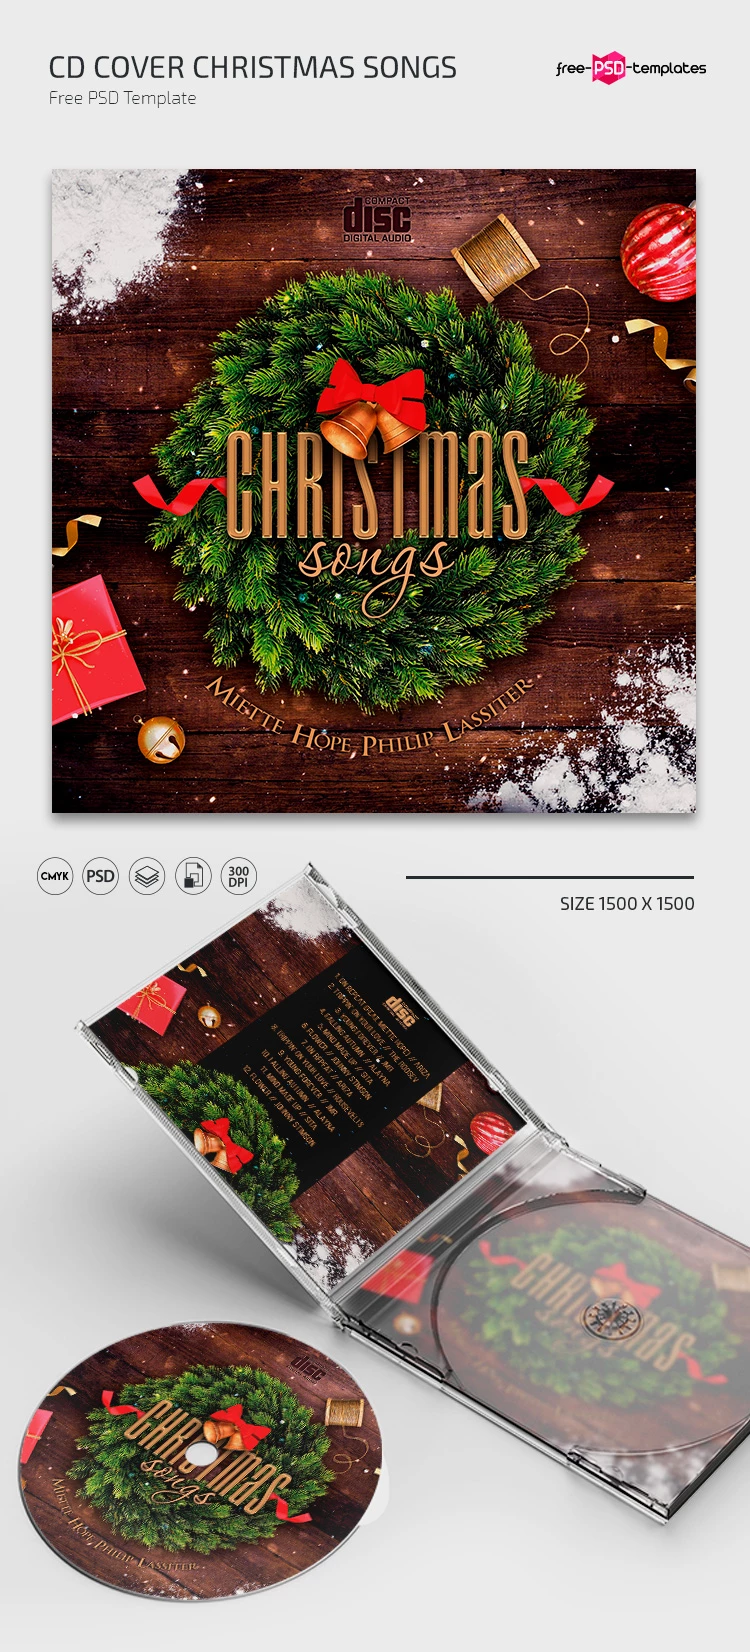 Free Christmas Songs CD Cover PSD Template